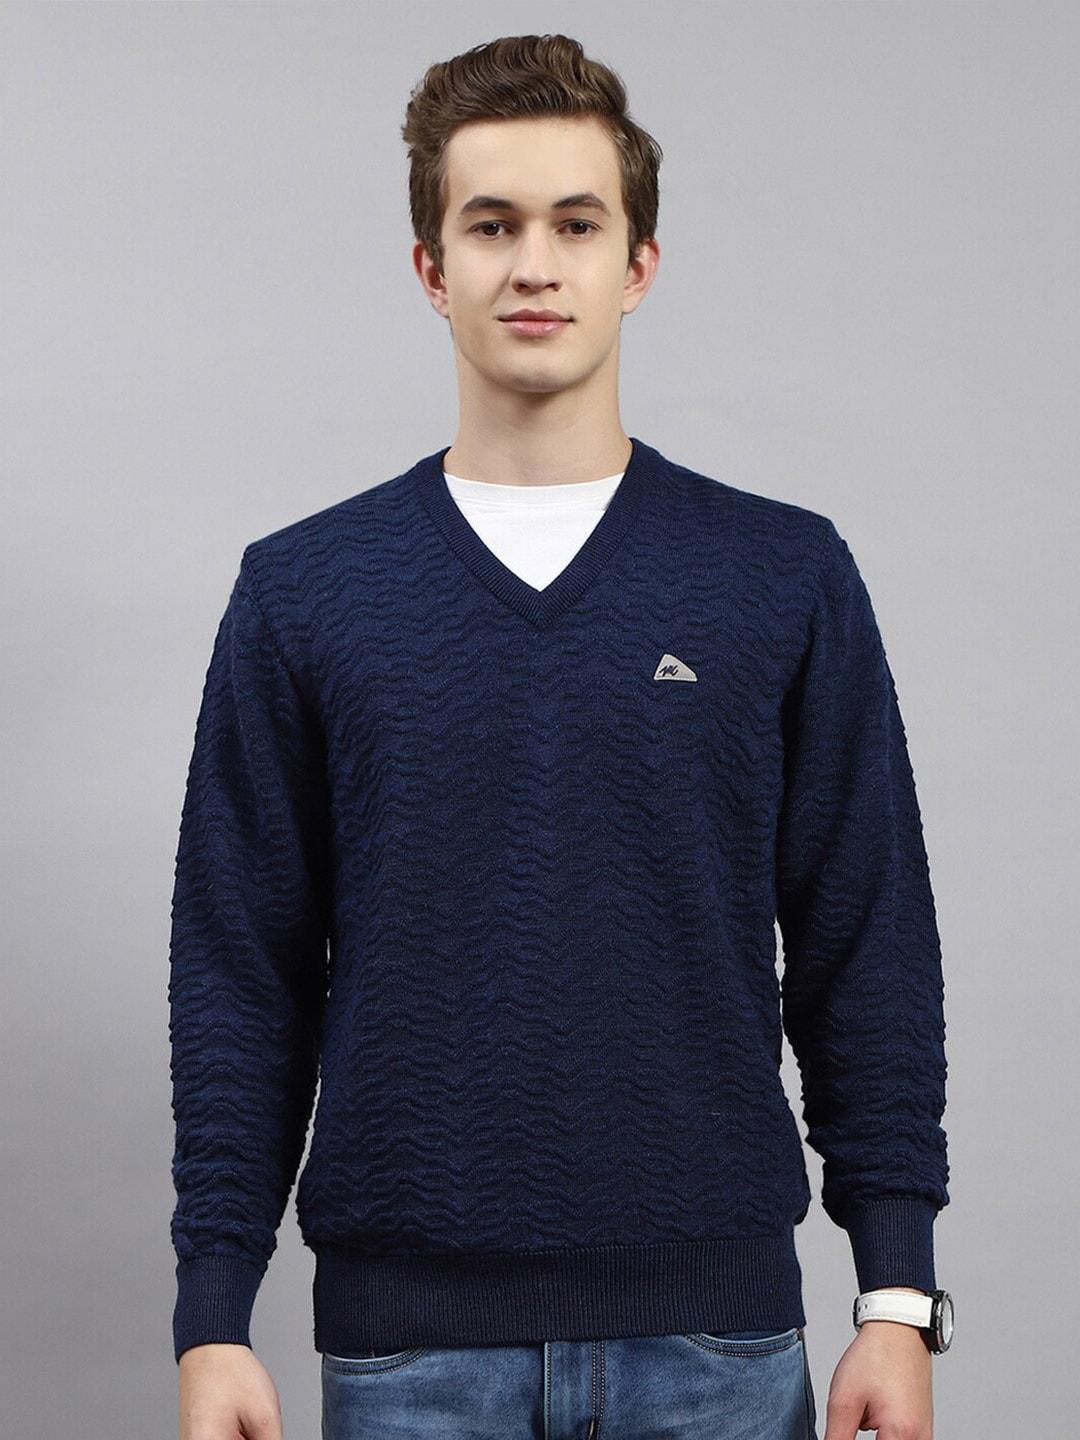 Monte Carlo Cable Knit Full Sleeve Woollen Pullover Sweater